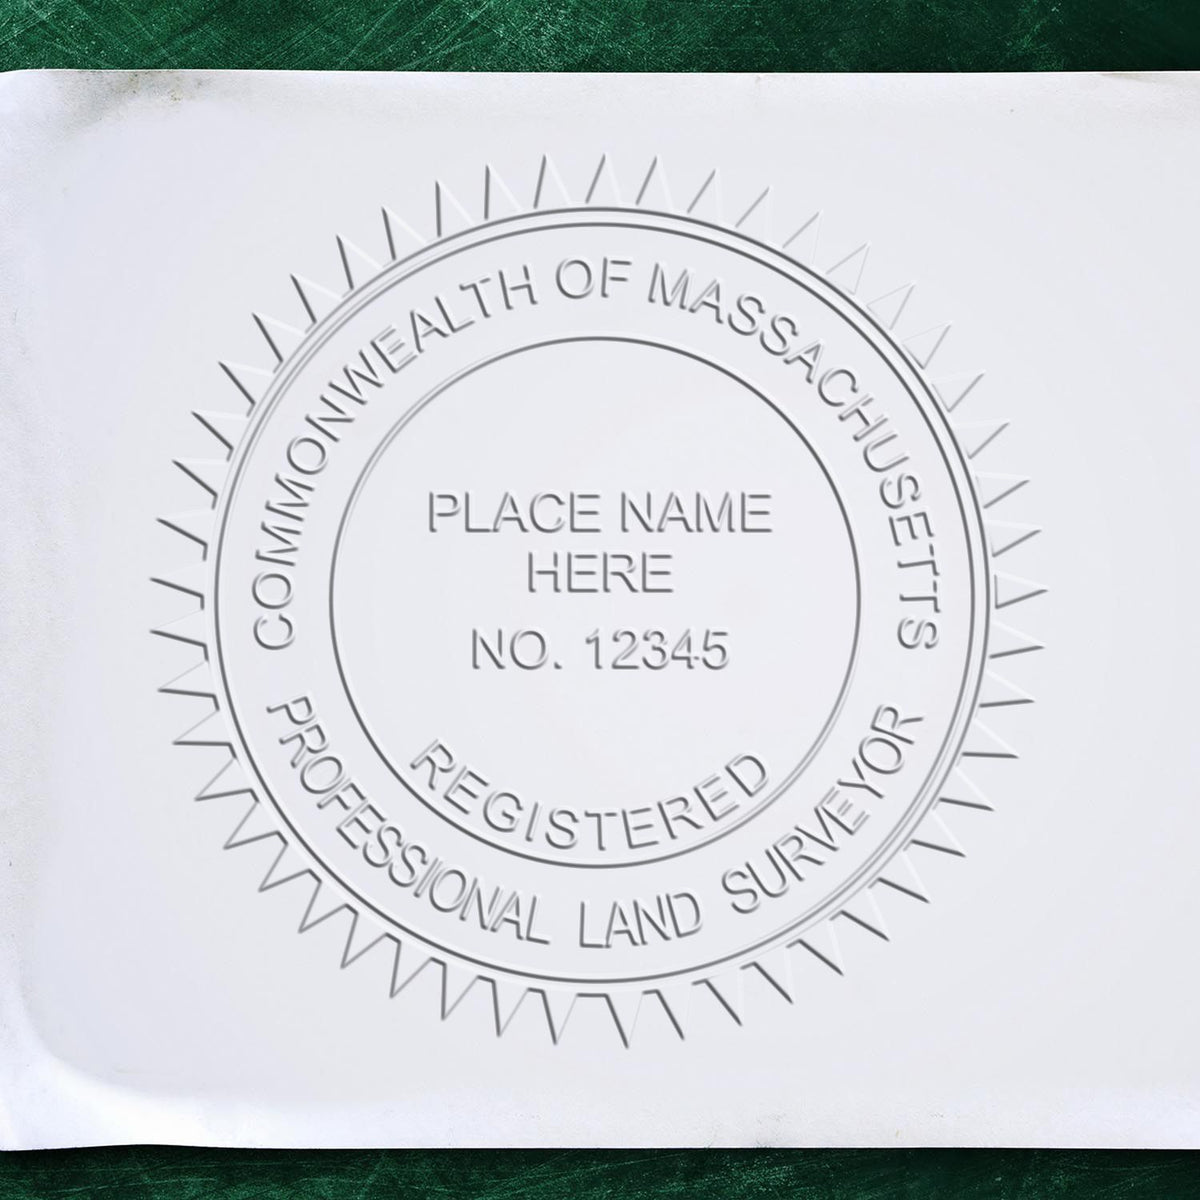 A stamped imprint of the Gift Massachusetts Land Surveyor Seal in this stylish lifestyle photo, setting the tone for a unique and personalized product.